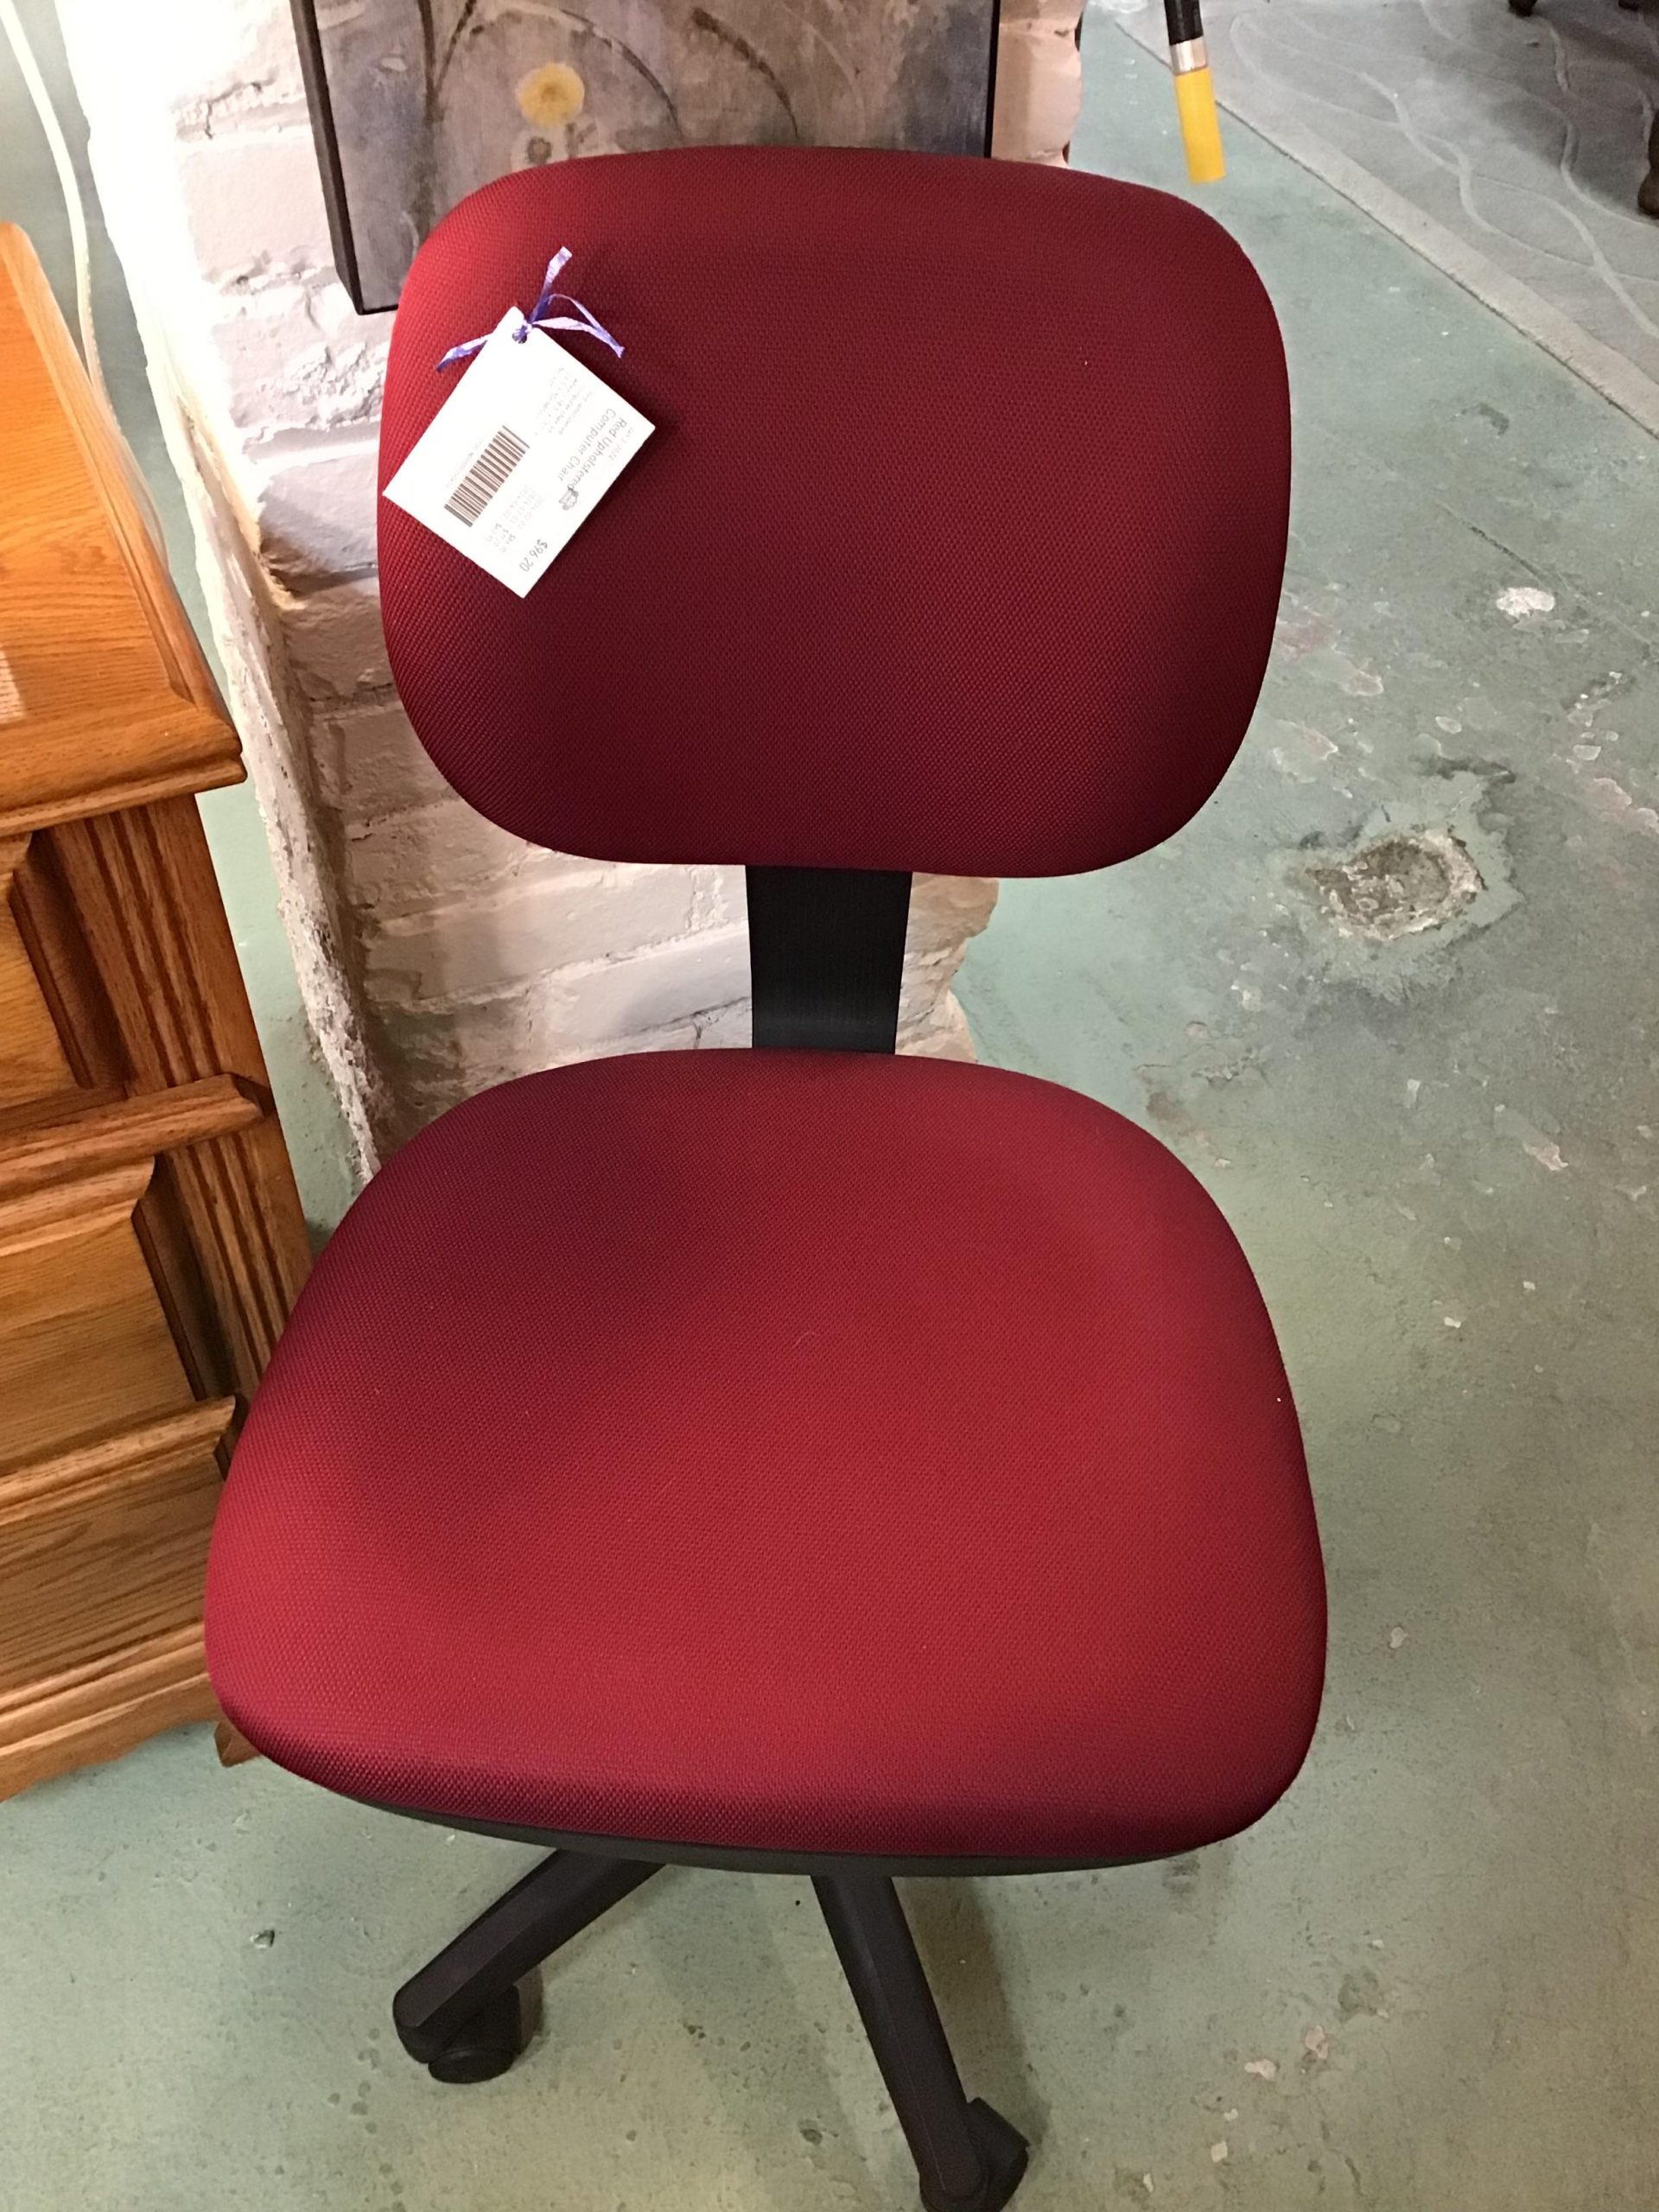 Red Upholstered Computer Chair   NEW PRICE $25.00